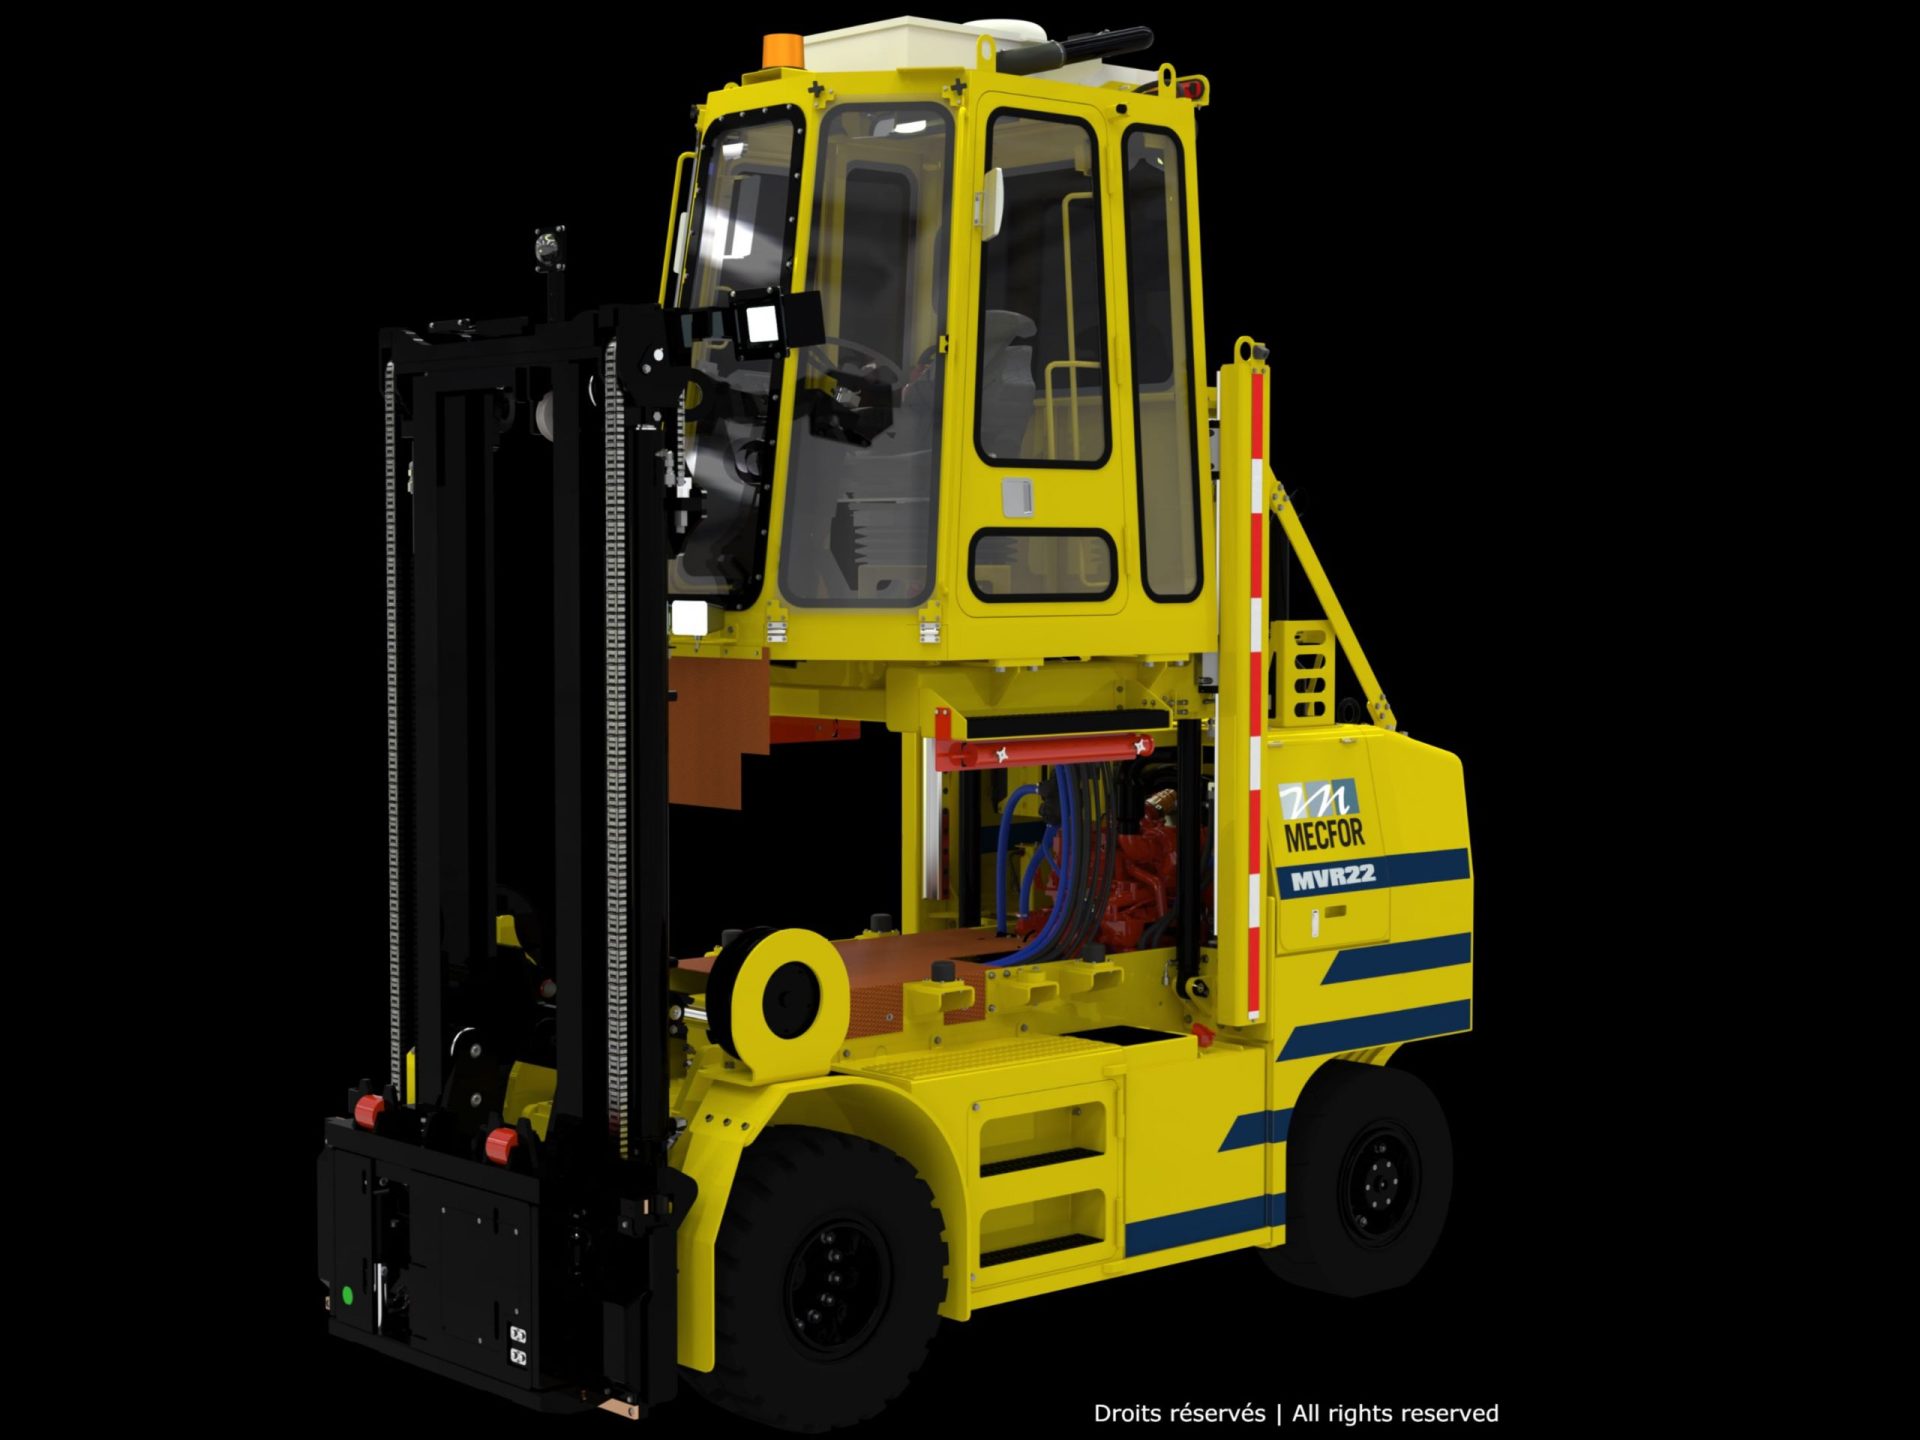 MVR22 - Casthouse Vehicle - lifting cab